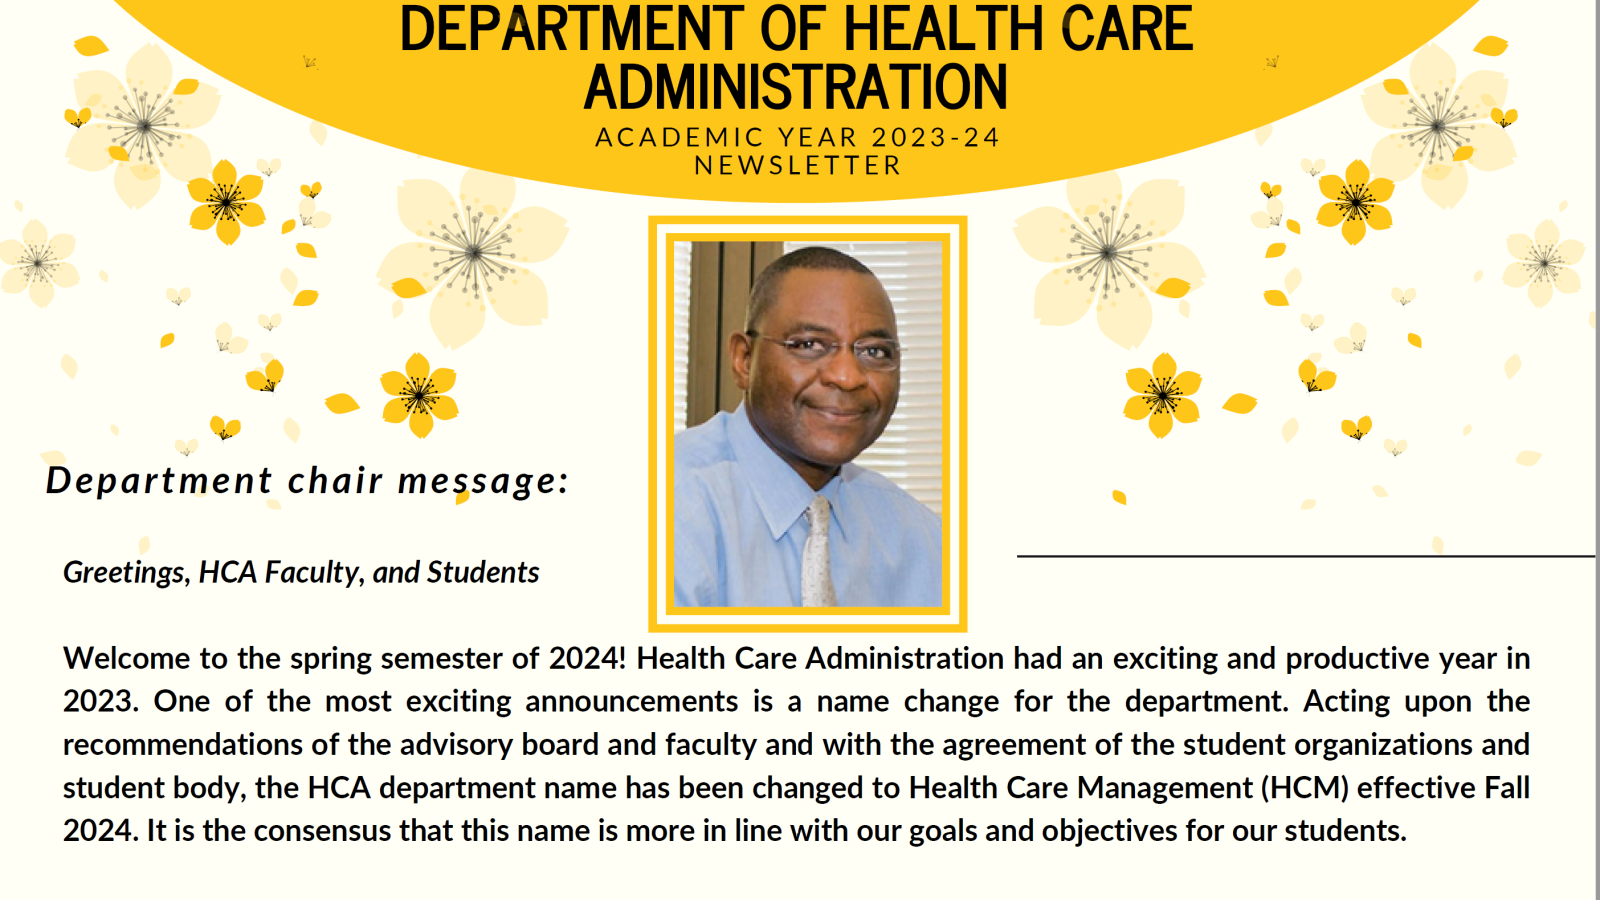 Health care administration picture with newsletter text